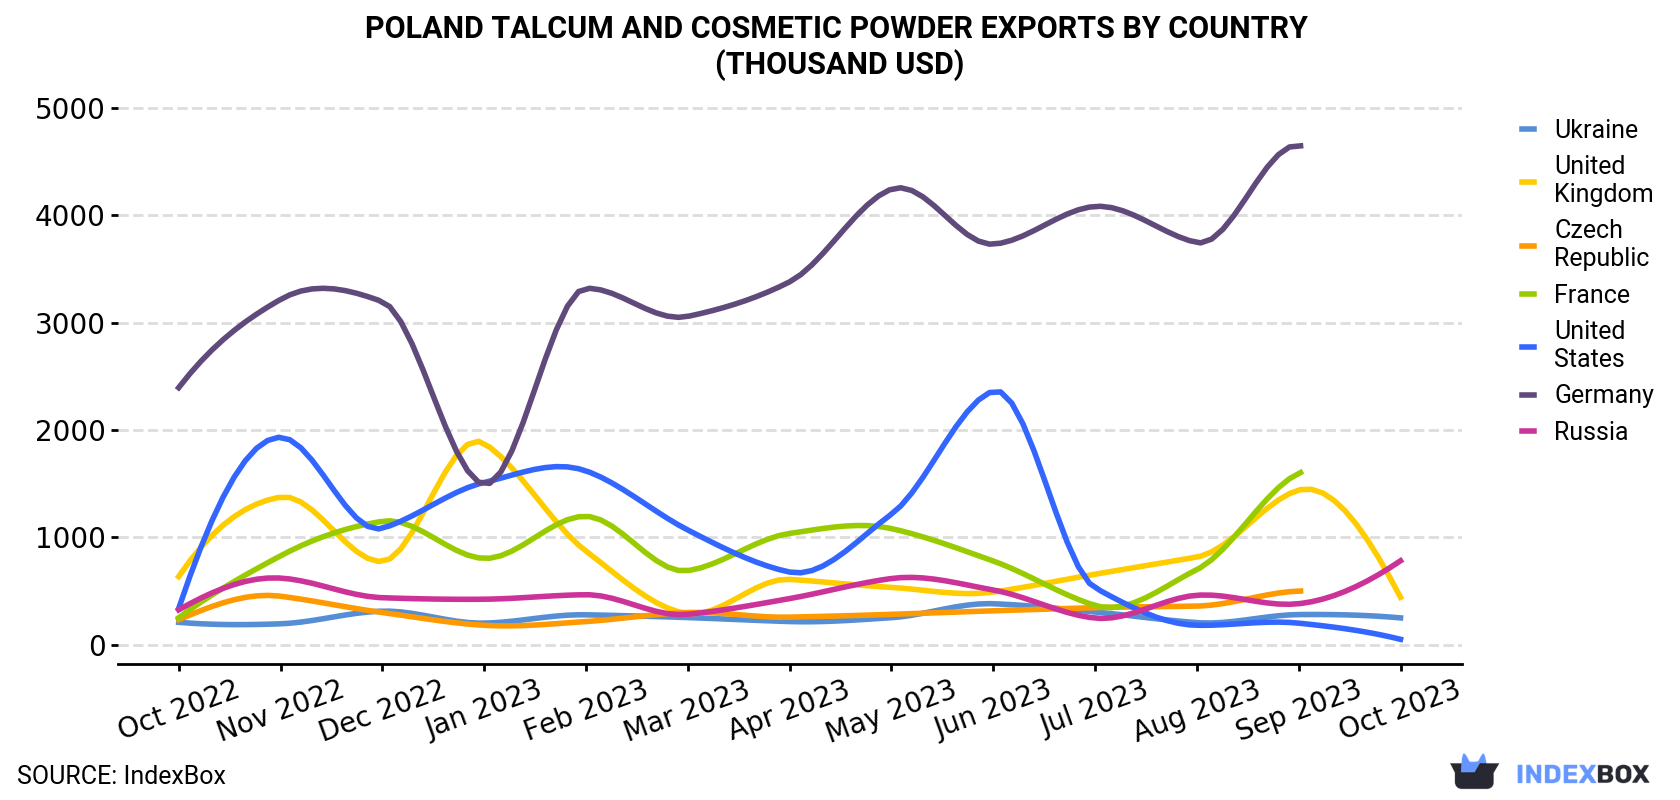 Poland Talcum and Cosmetic Powder Exports By Country (Thousand USD)